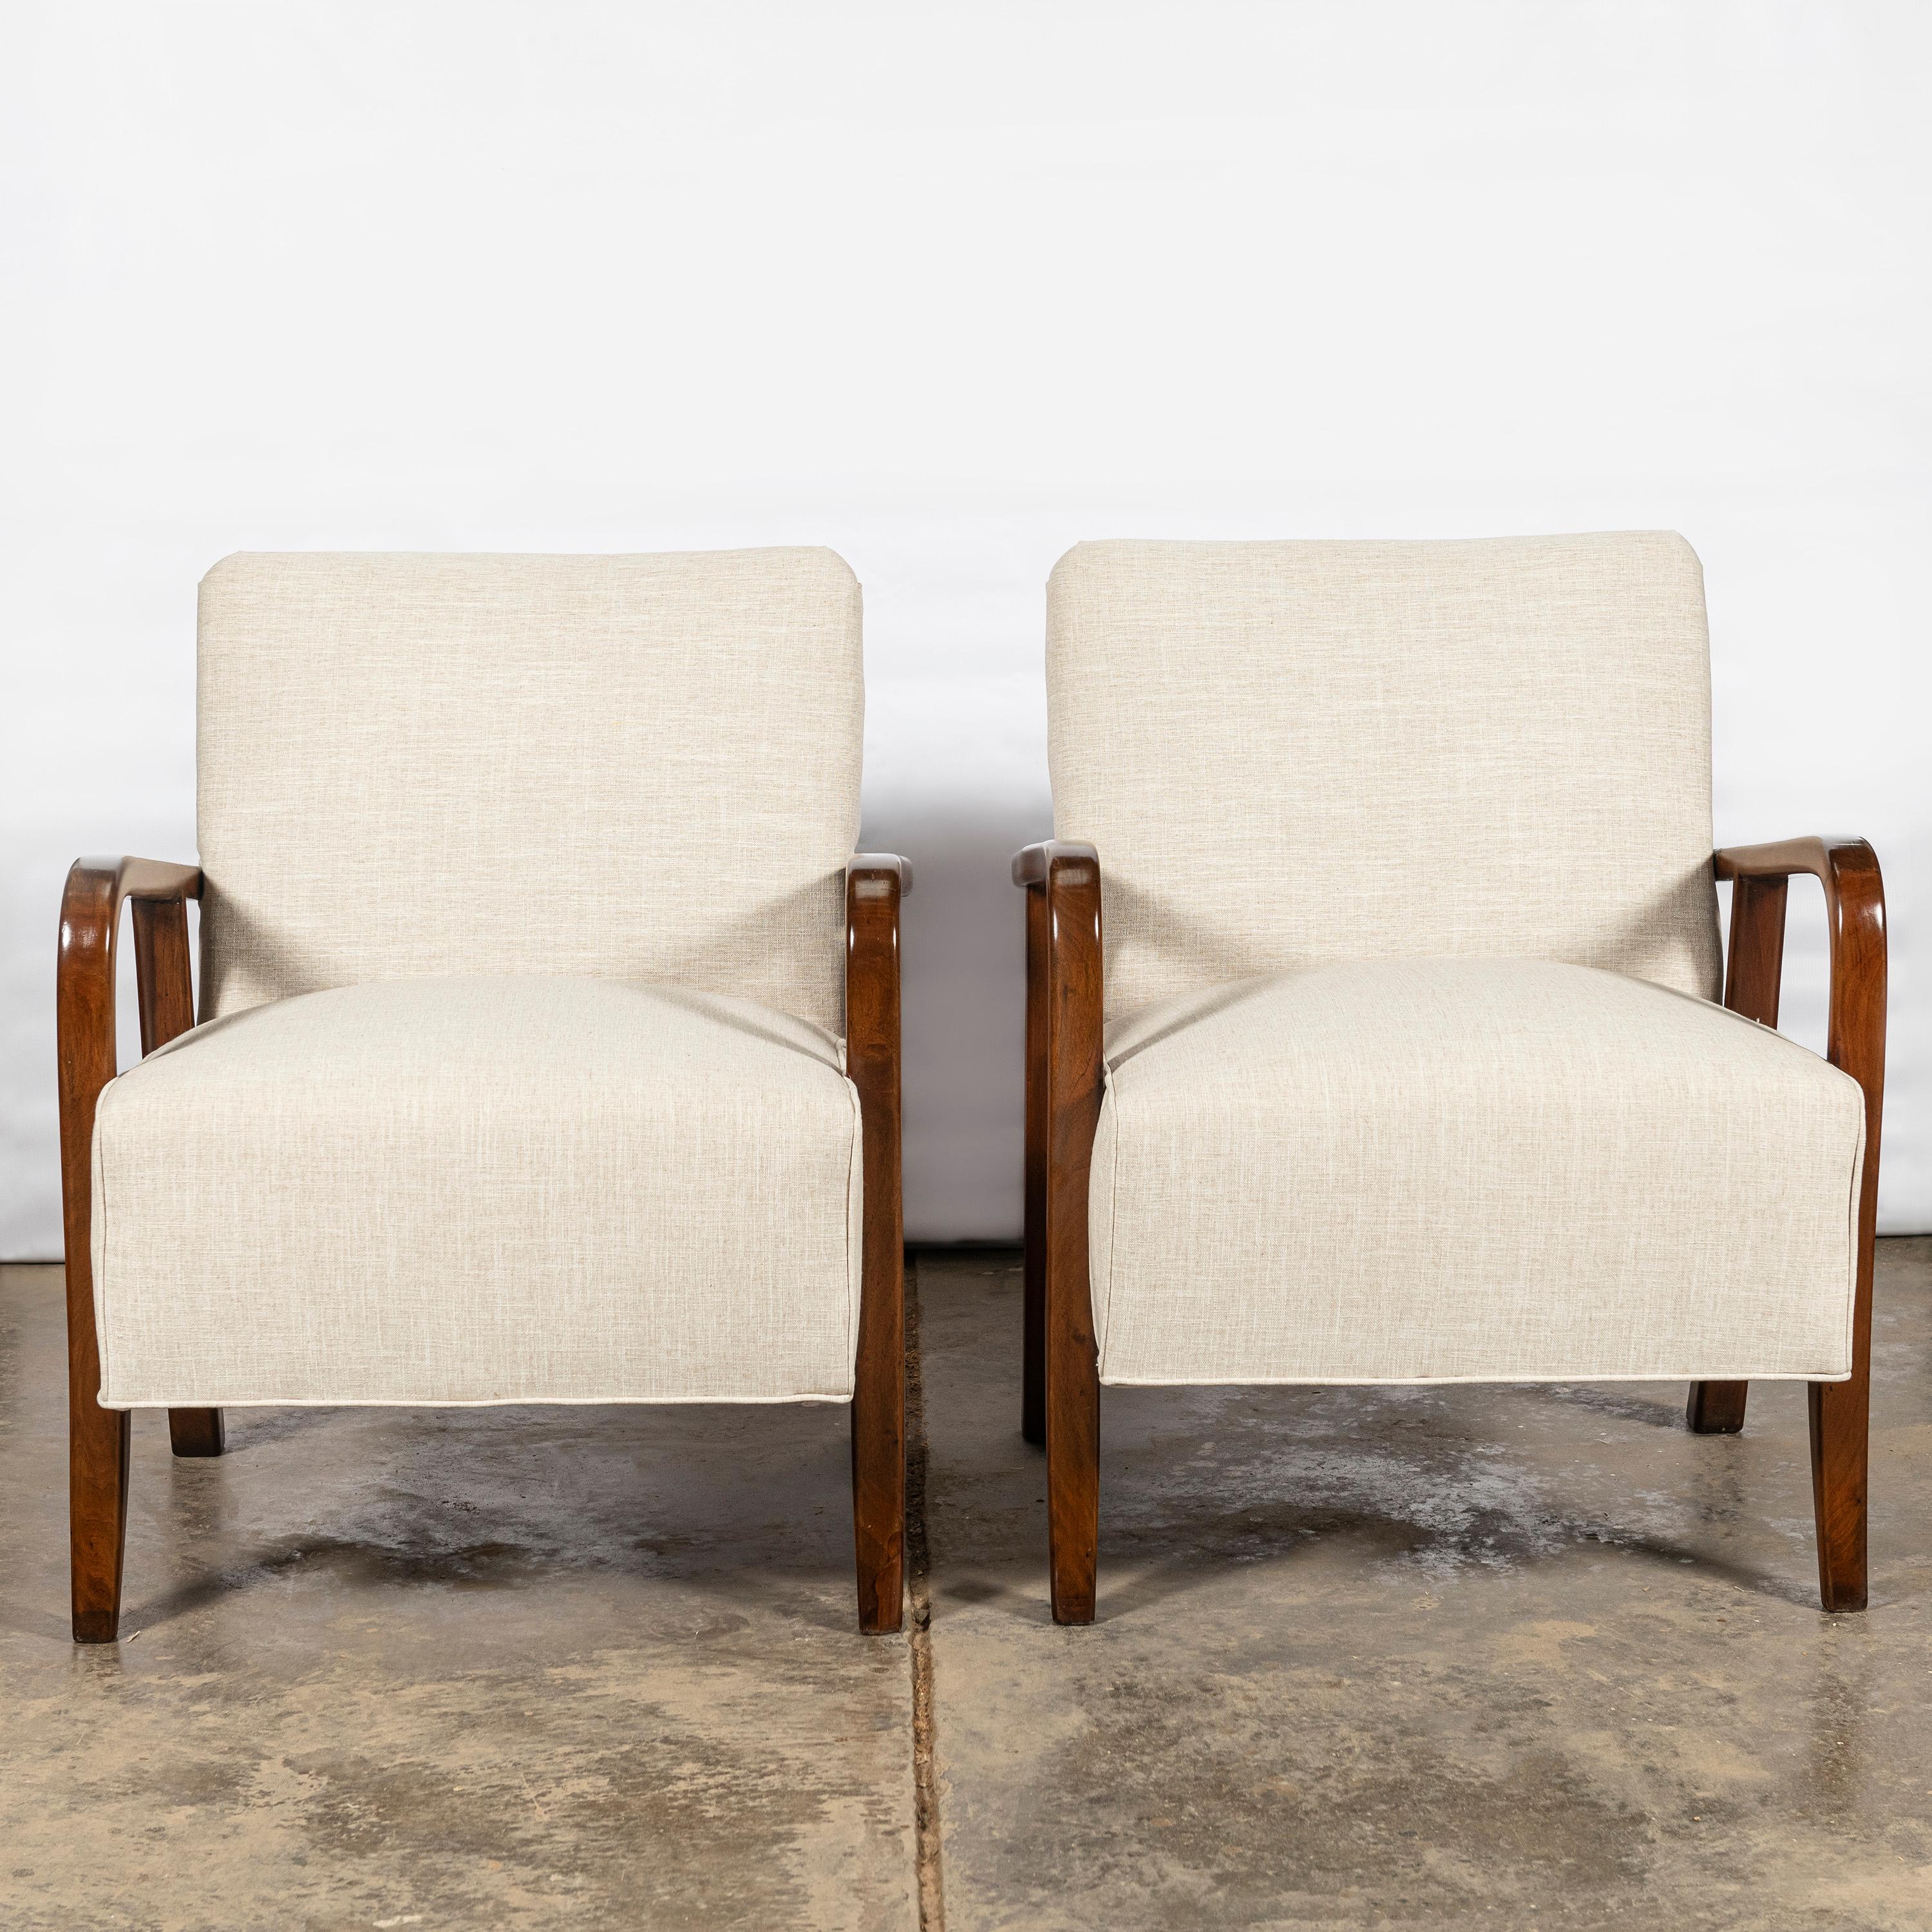 Pair of wood and fabric armchairs by Nordiska. Argentina, circa 1950.